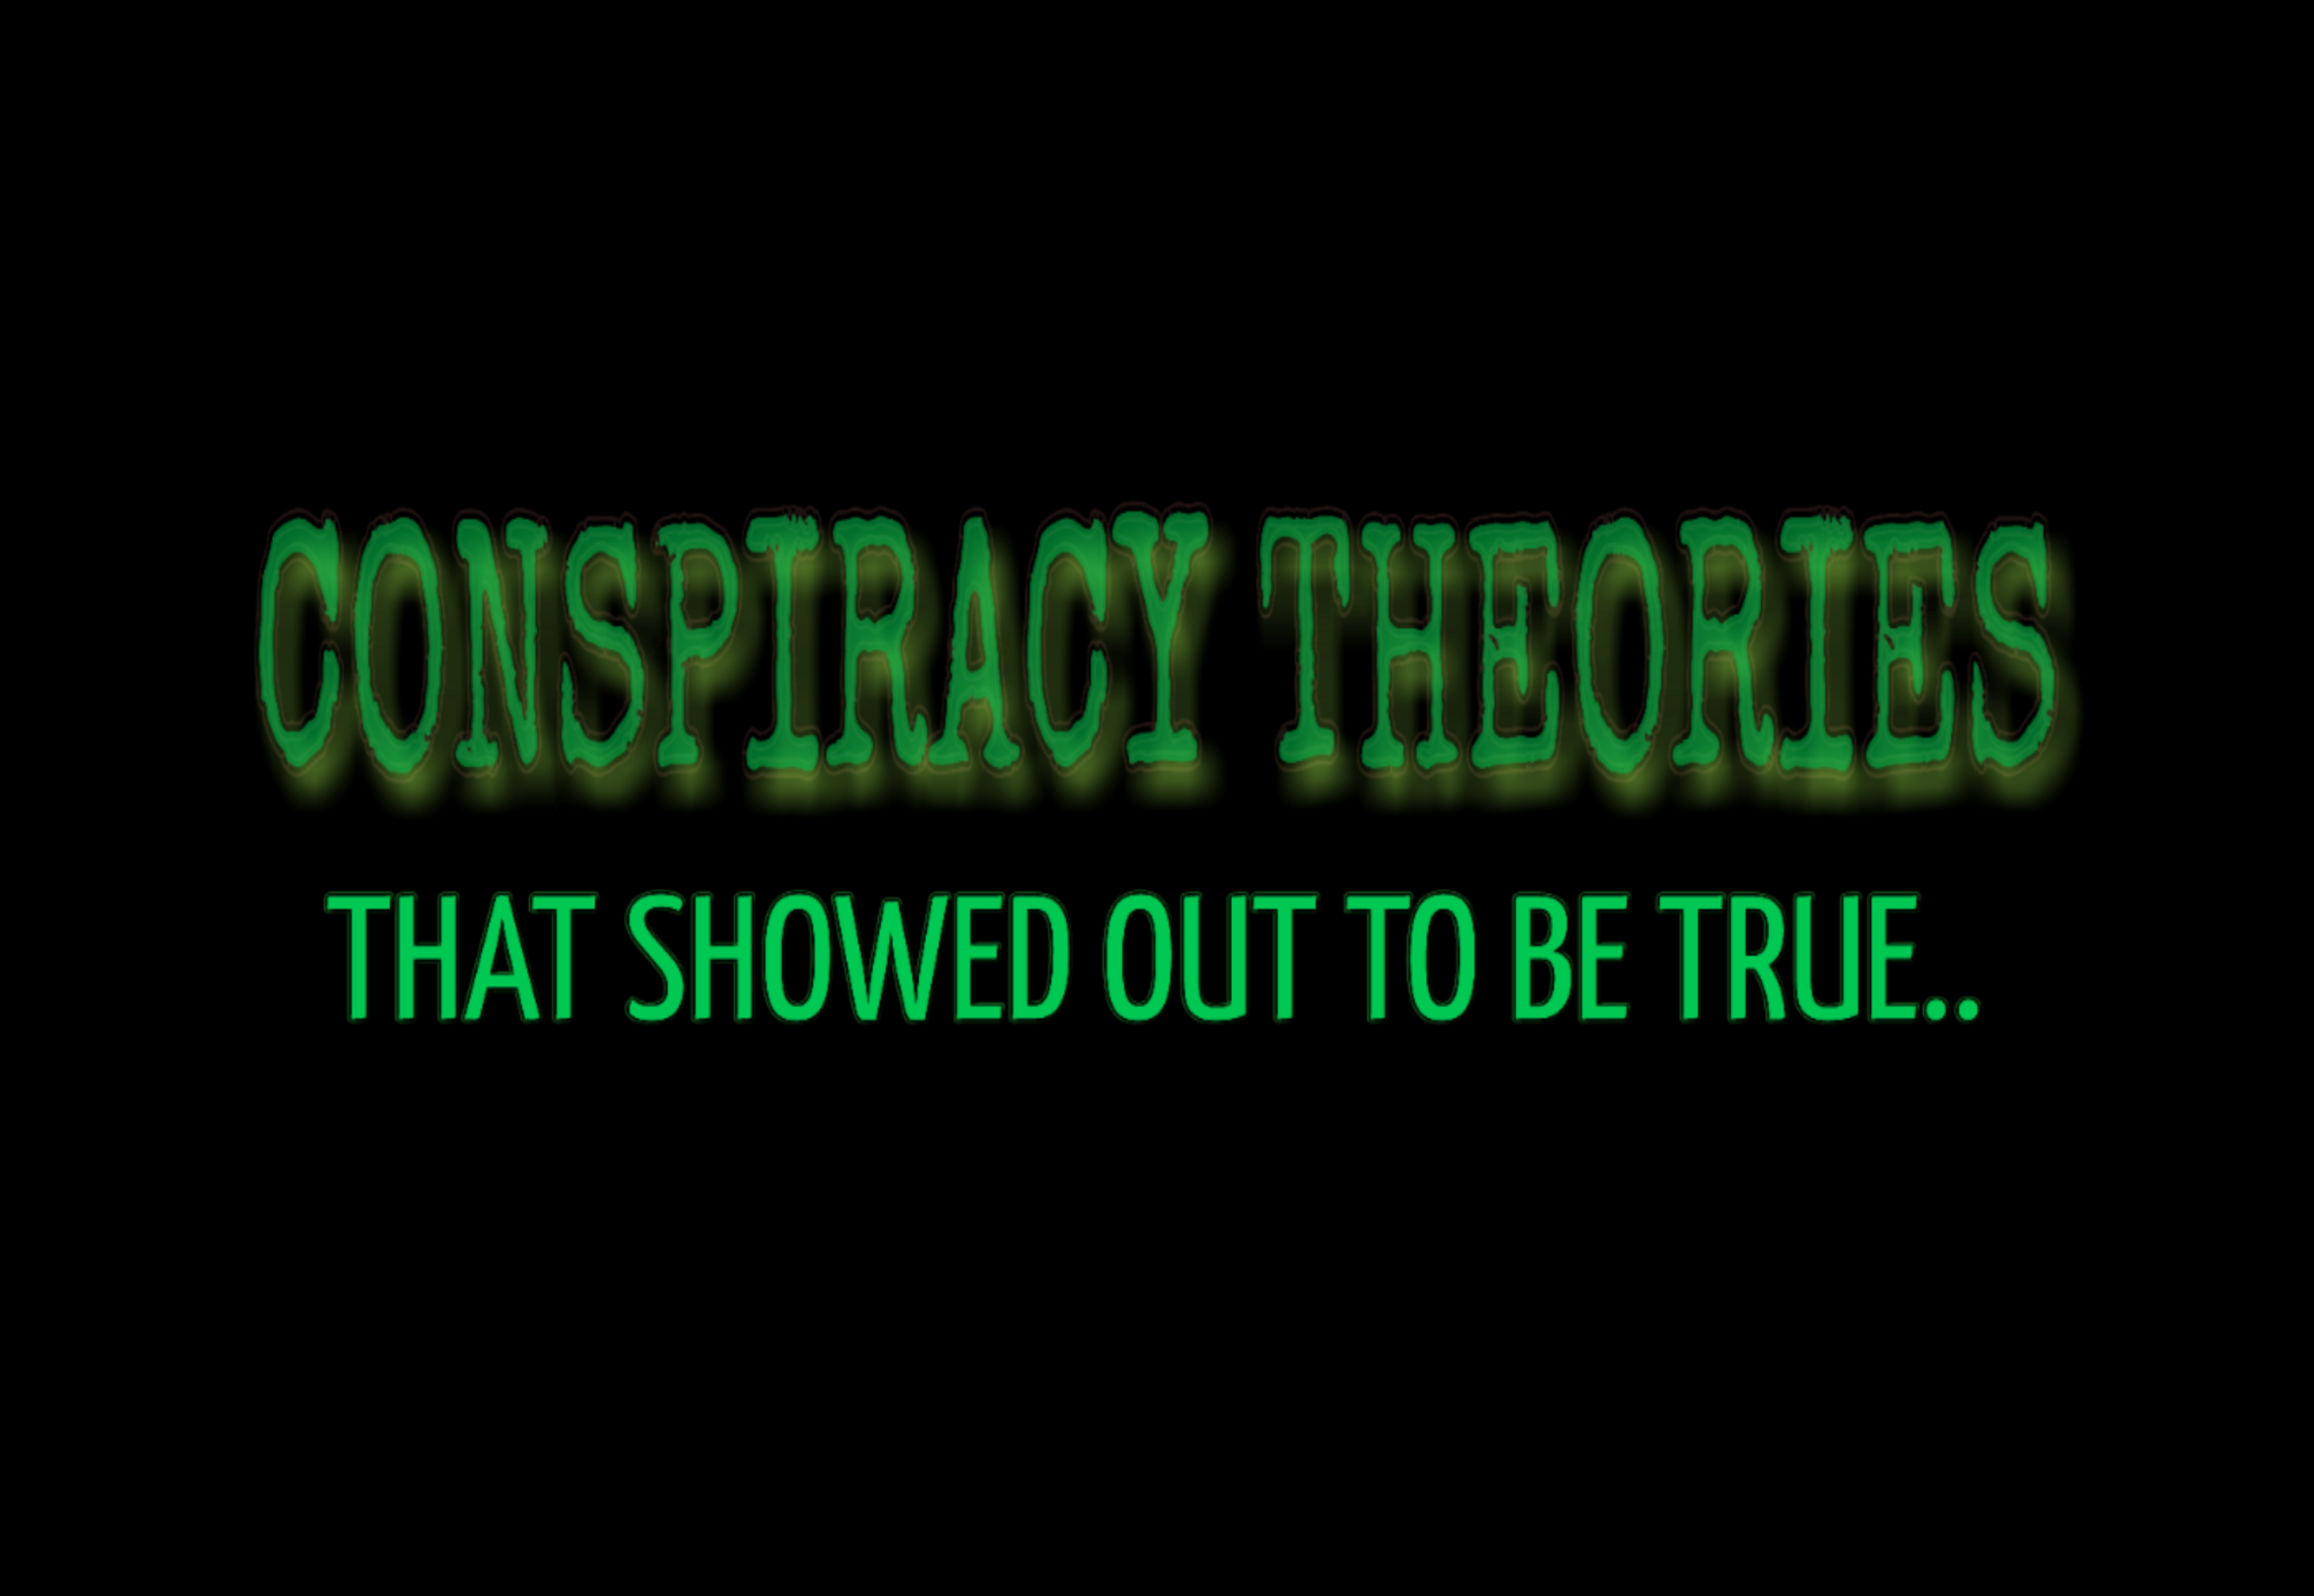 wallpaper_conspiracy-theory-es-that-showed-out-to-be-true